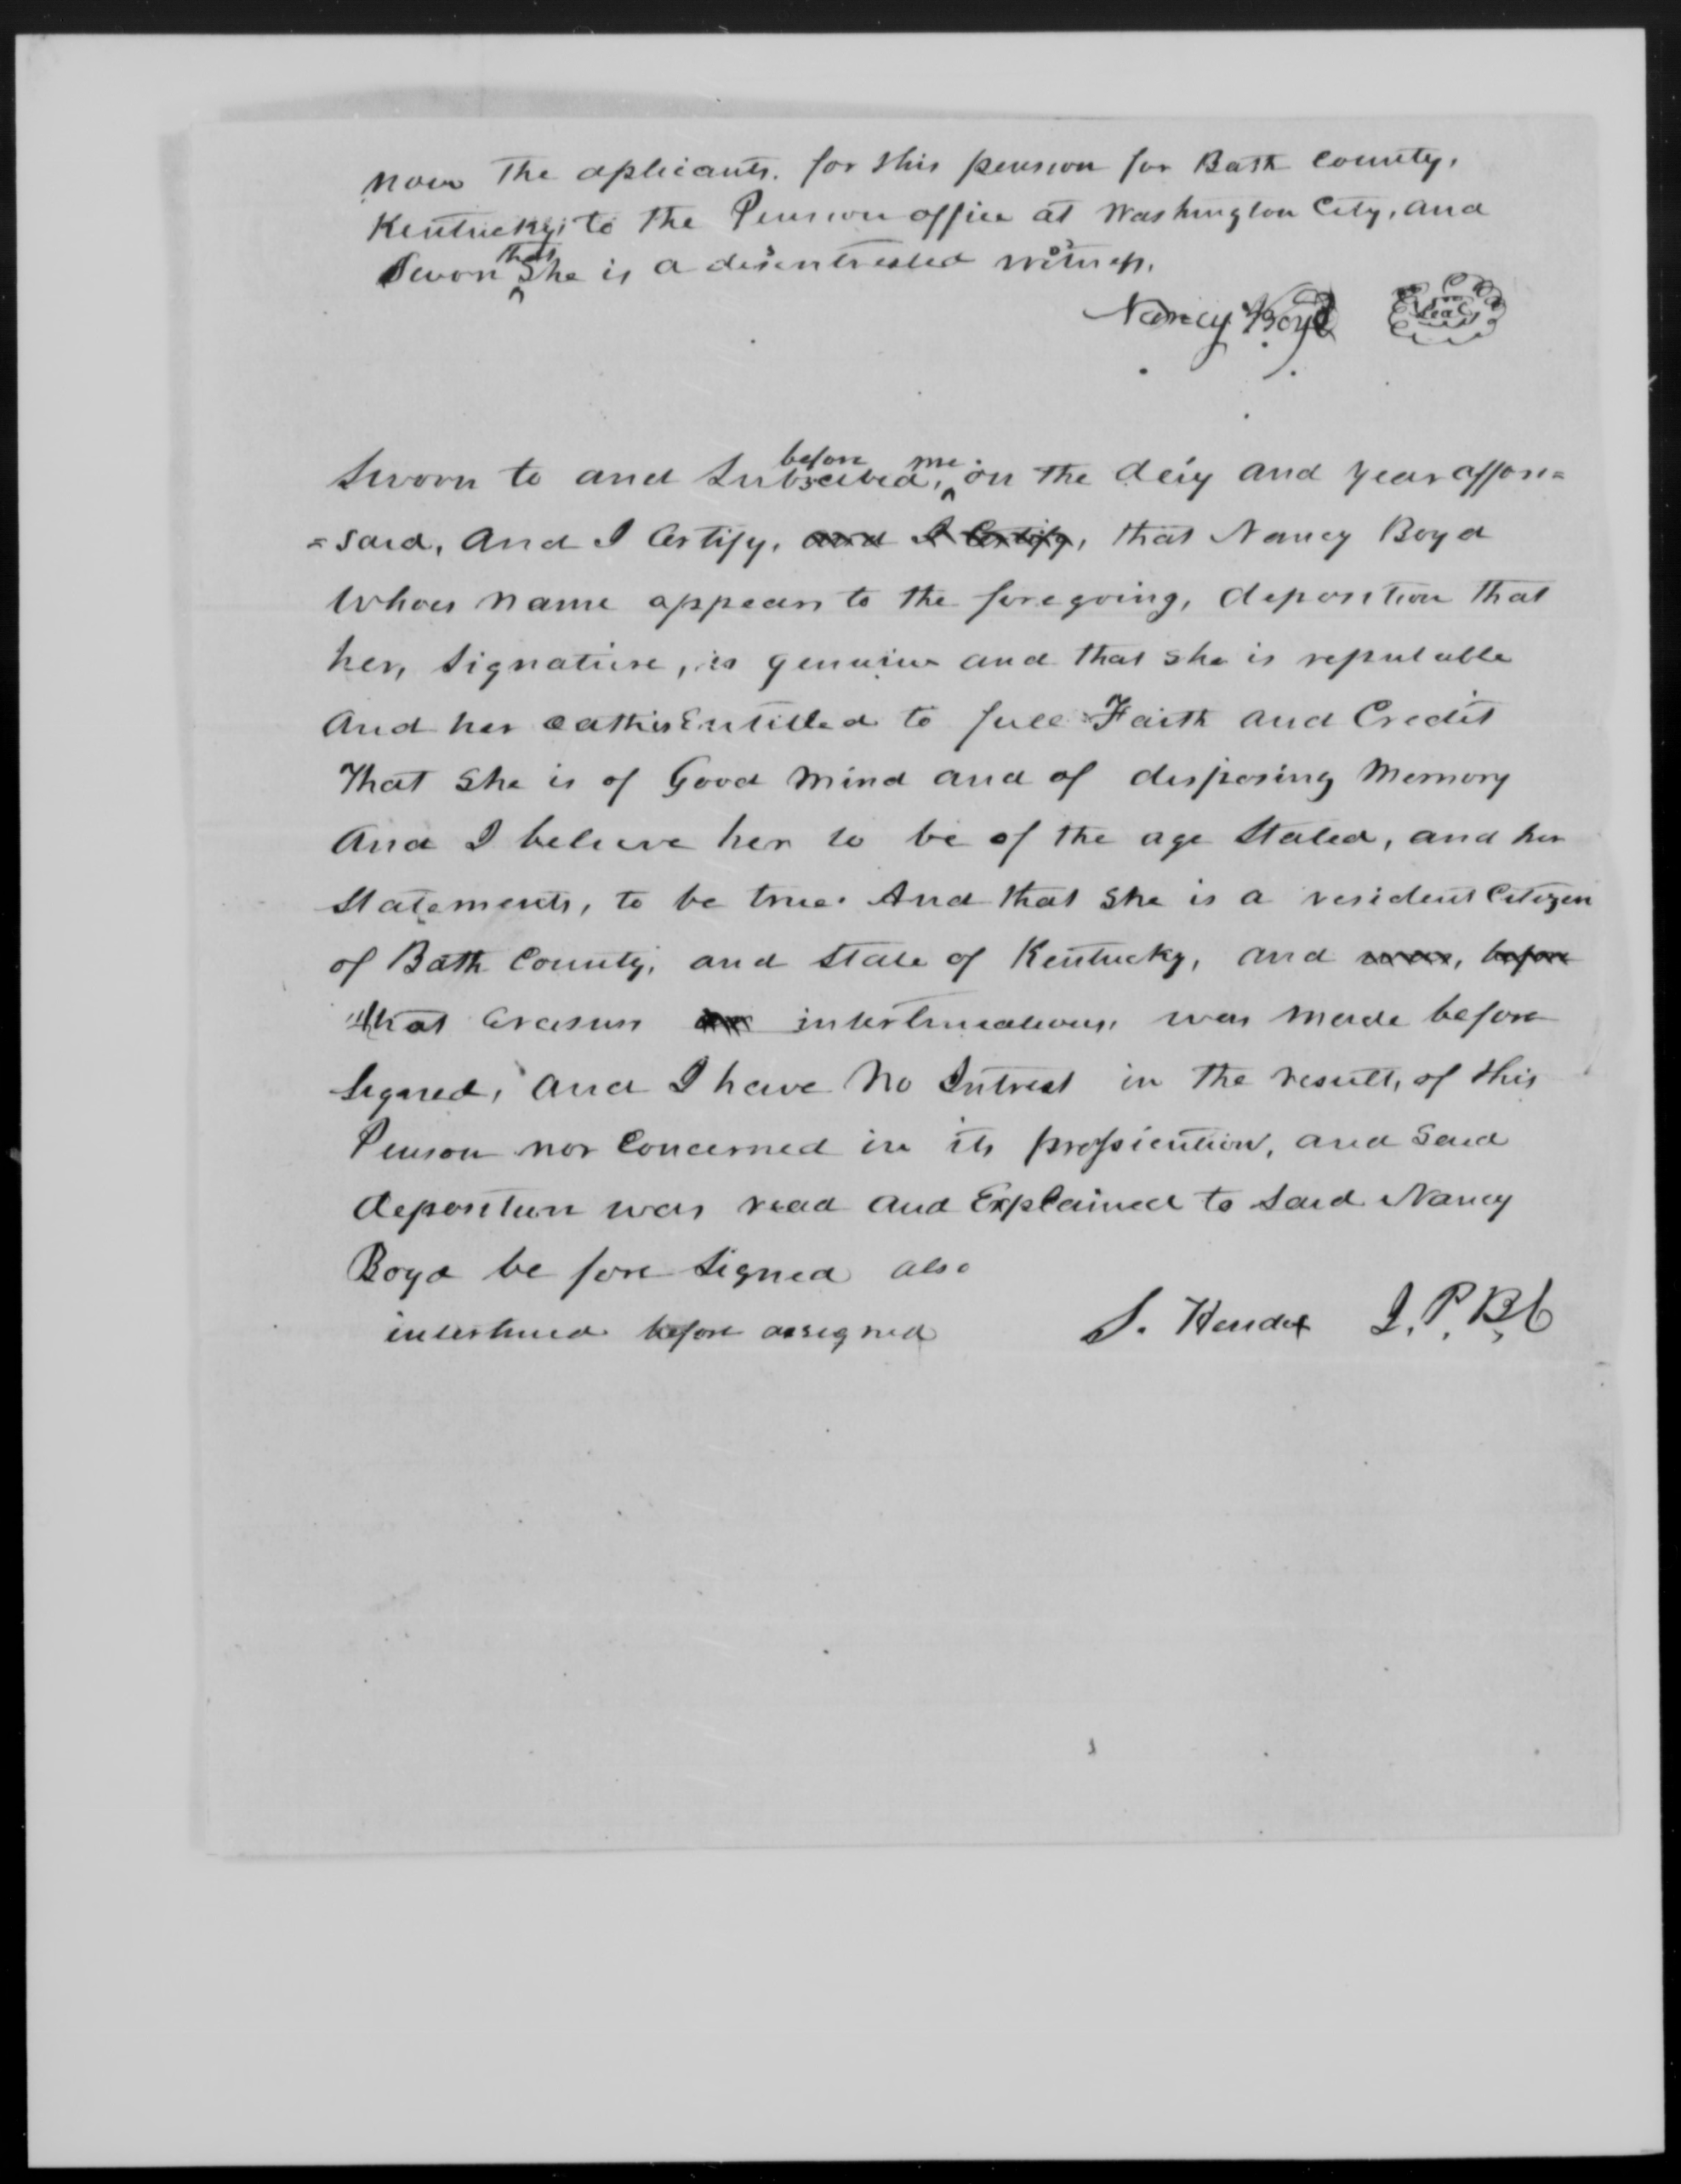 Affidavit of Nancy Boyd in support of a Pension Claim for Mary Yarborough, 24 January 1854, page 3